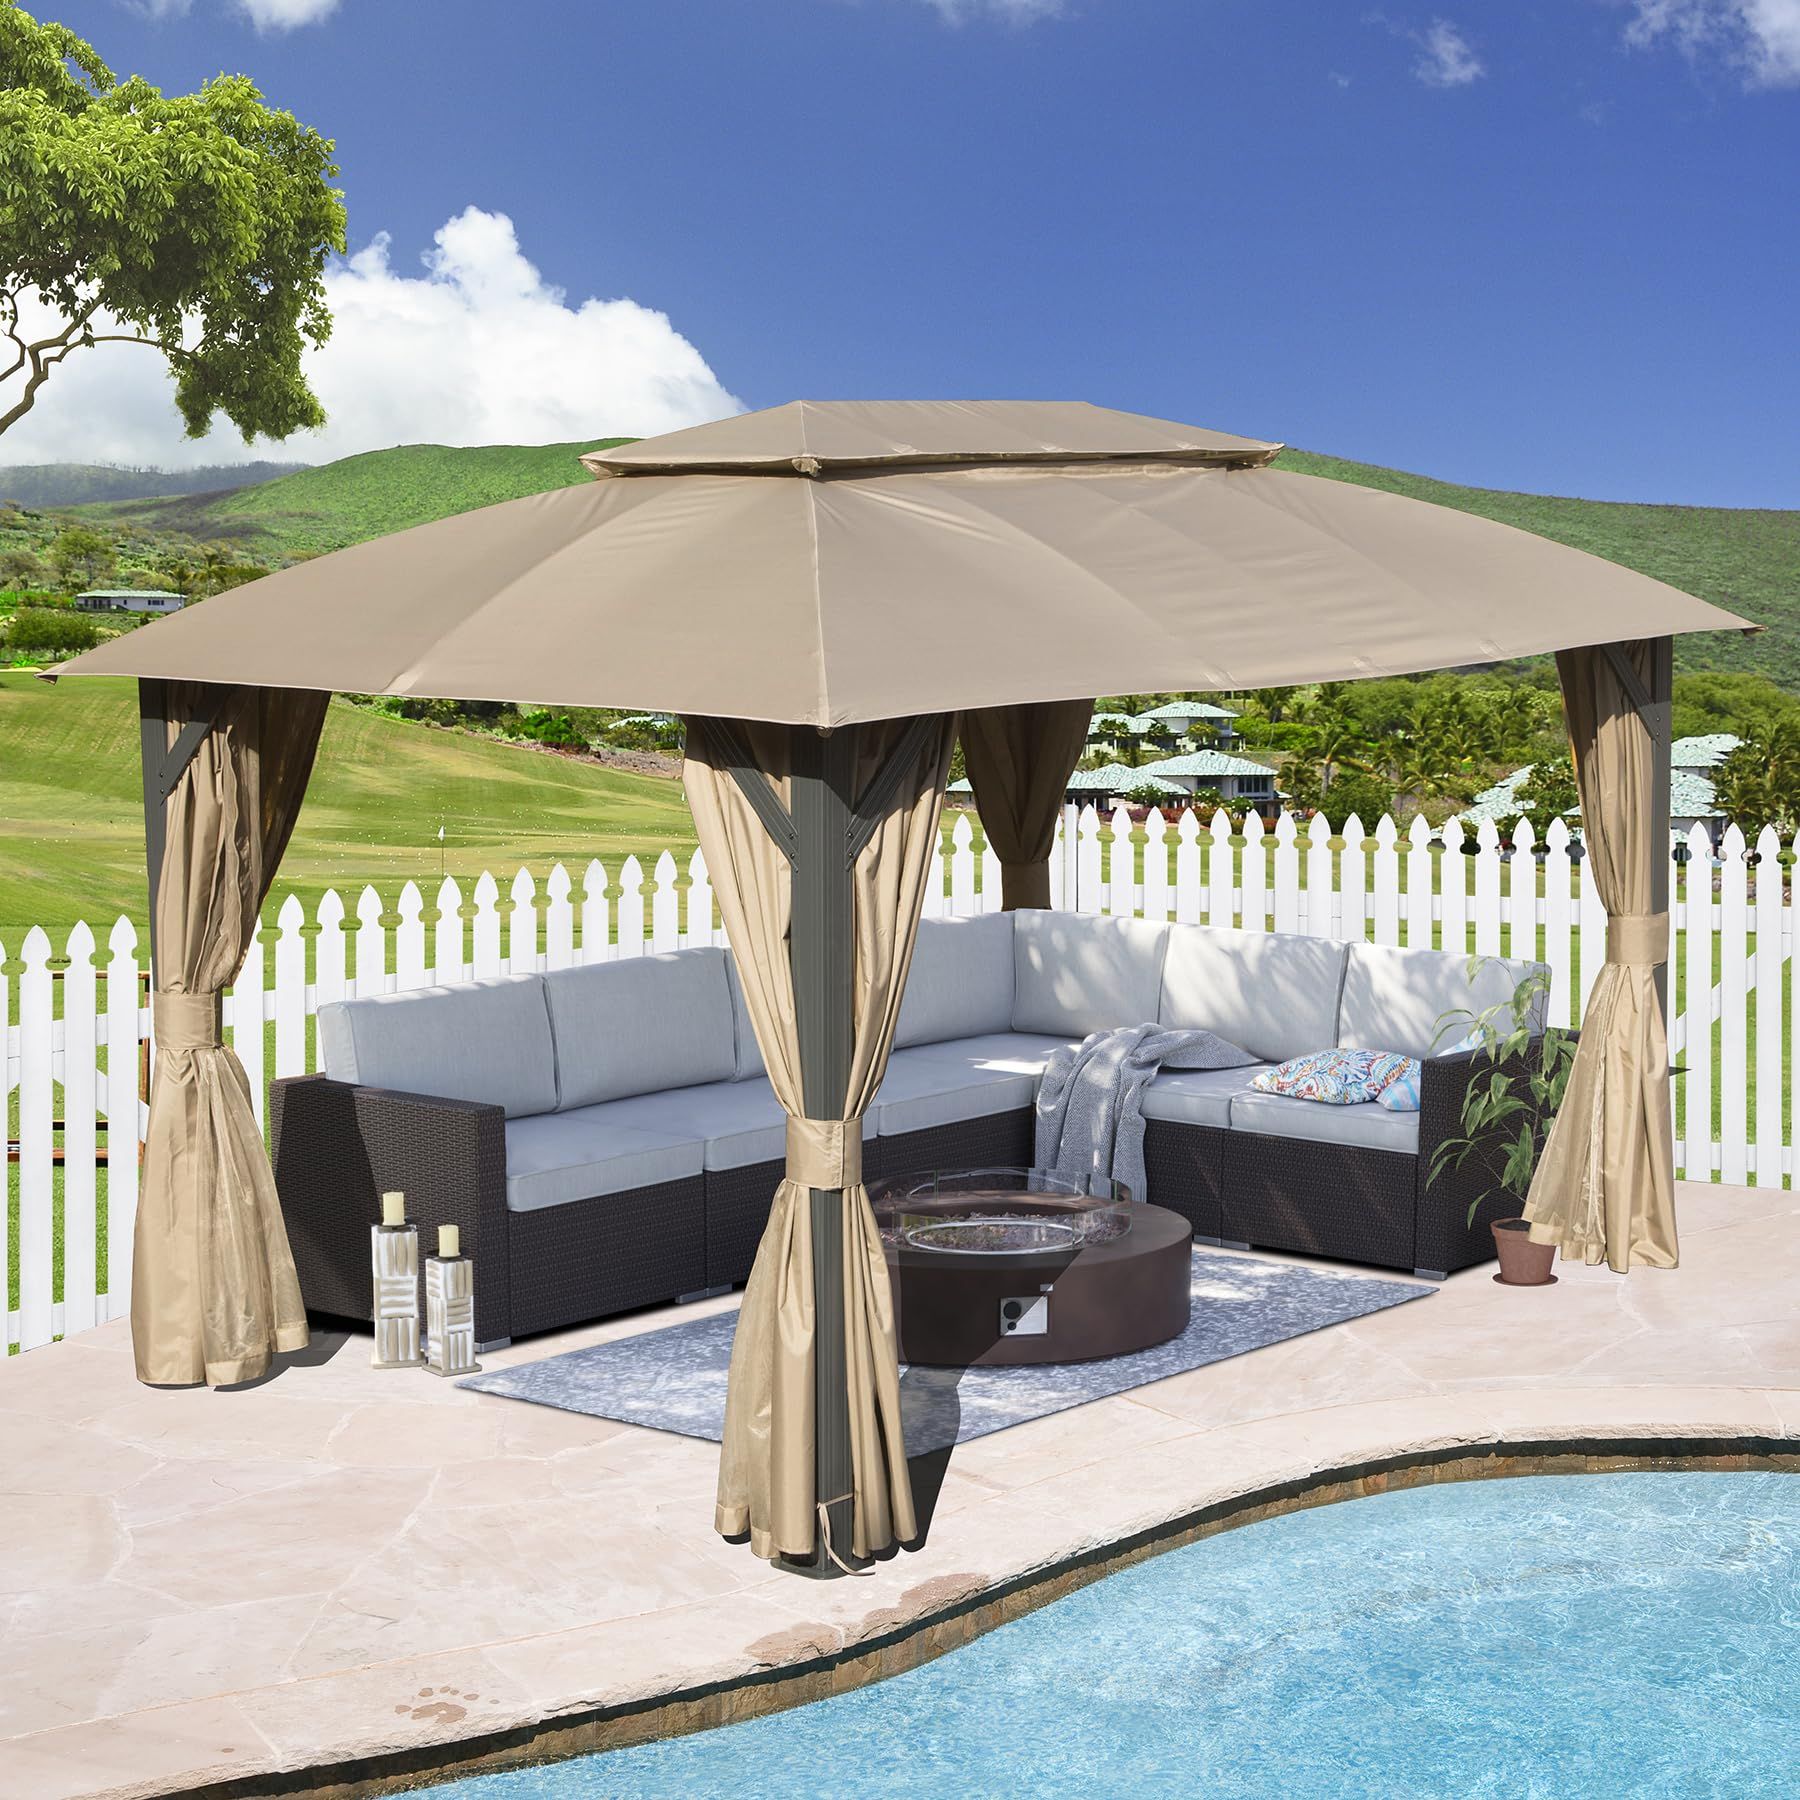 The Beauty and Functionality of Gazebo Canopies